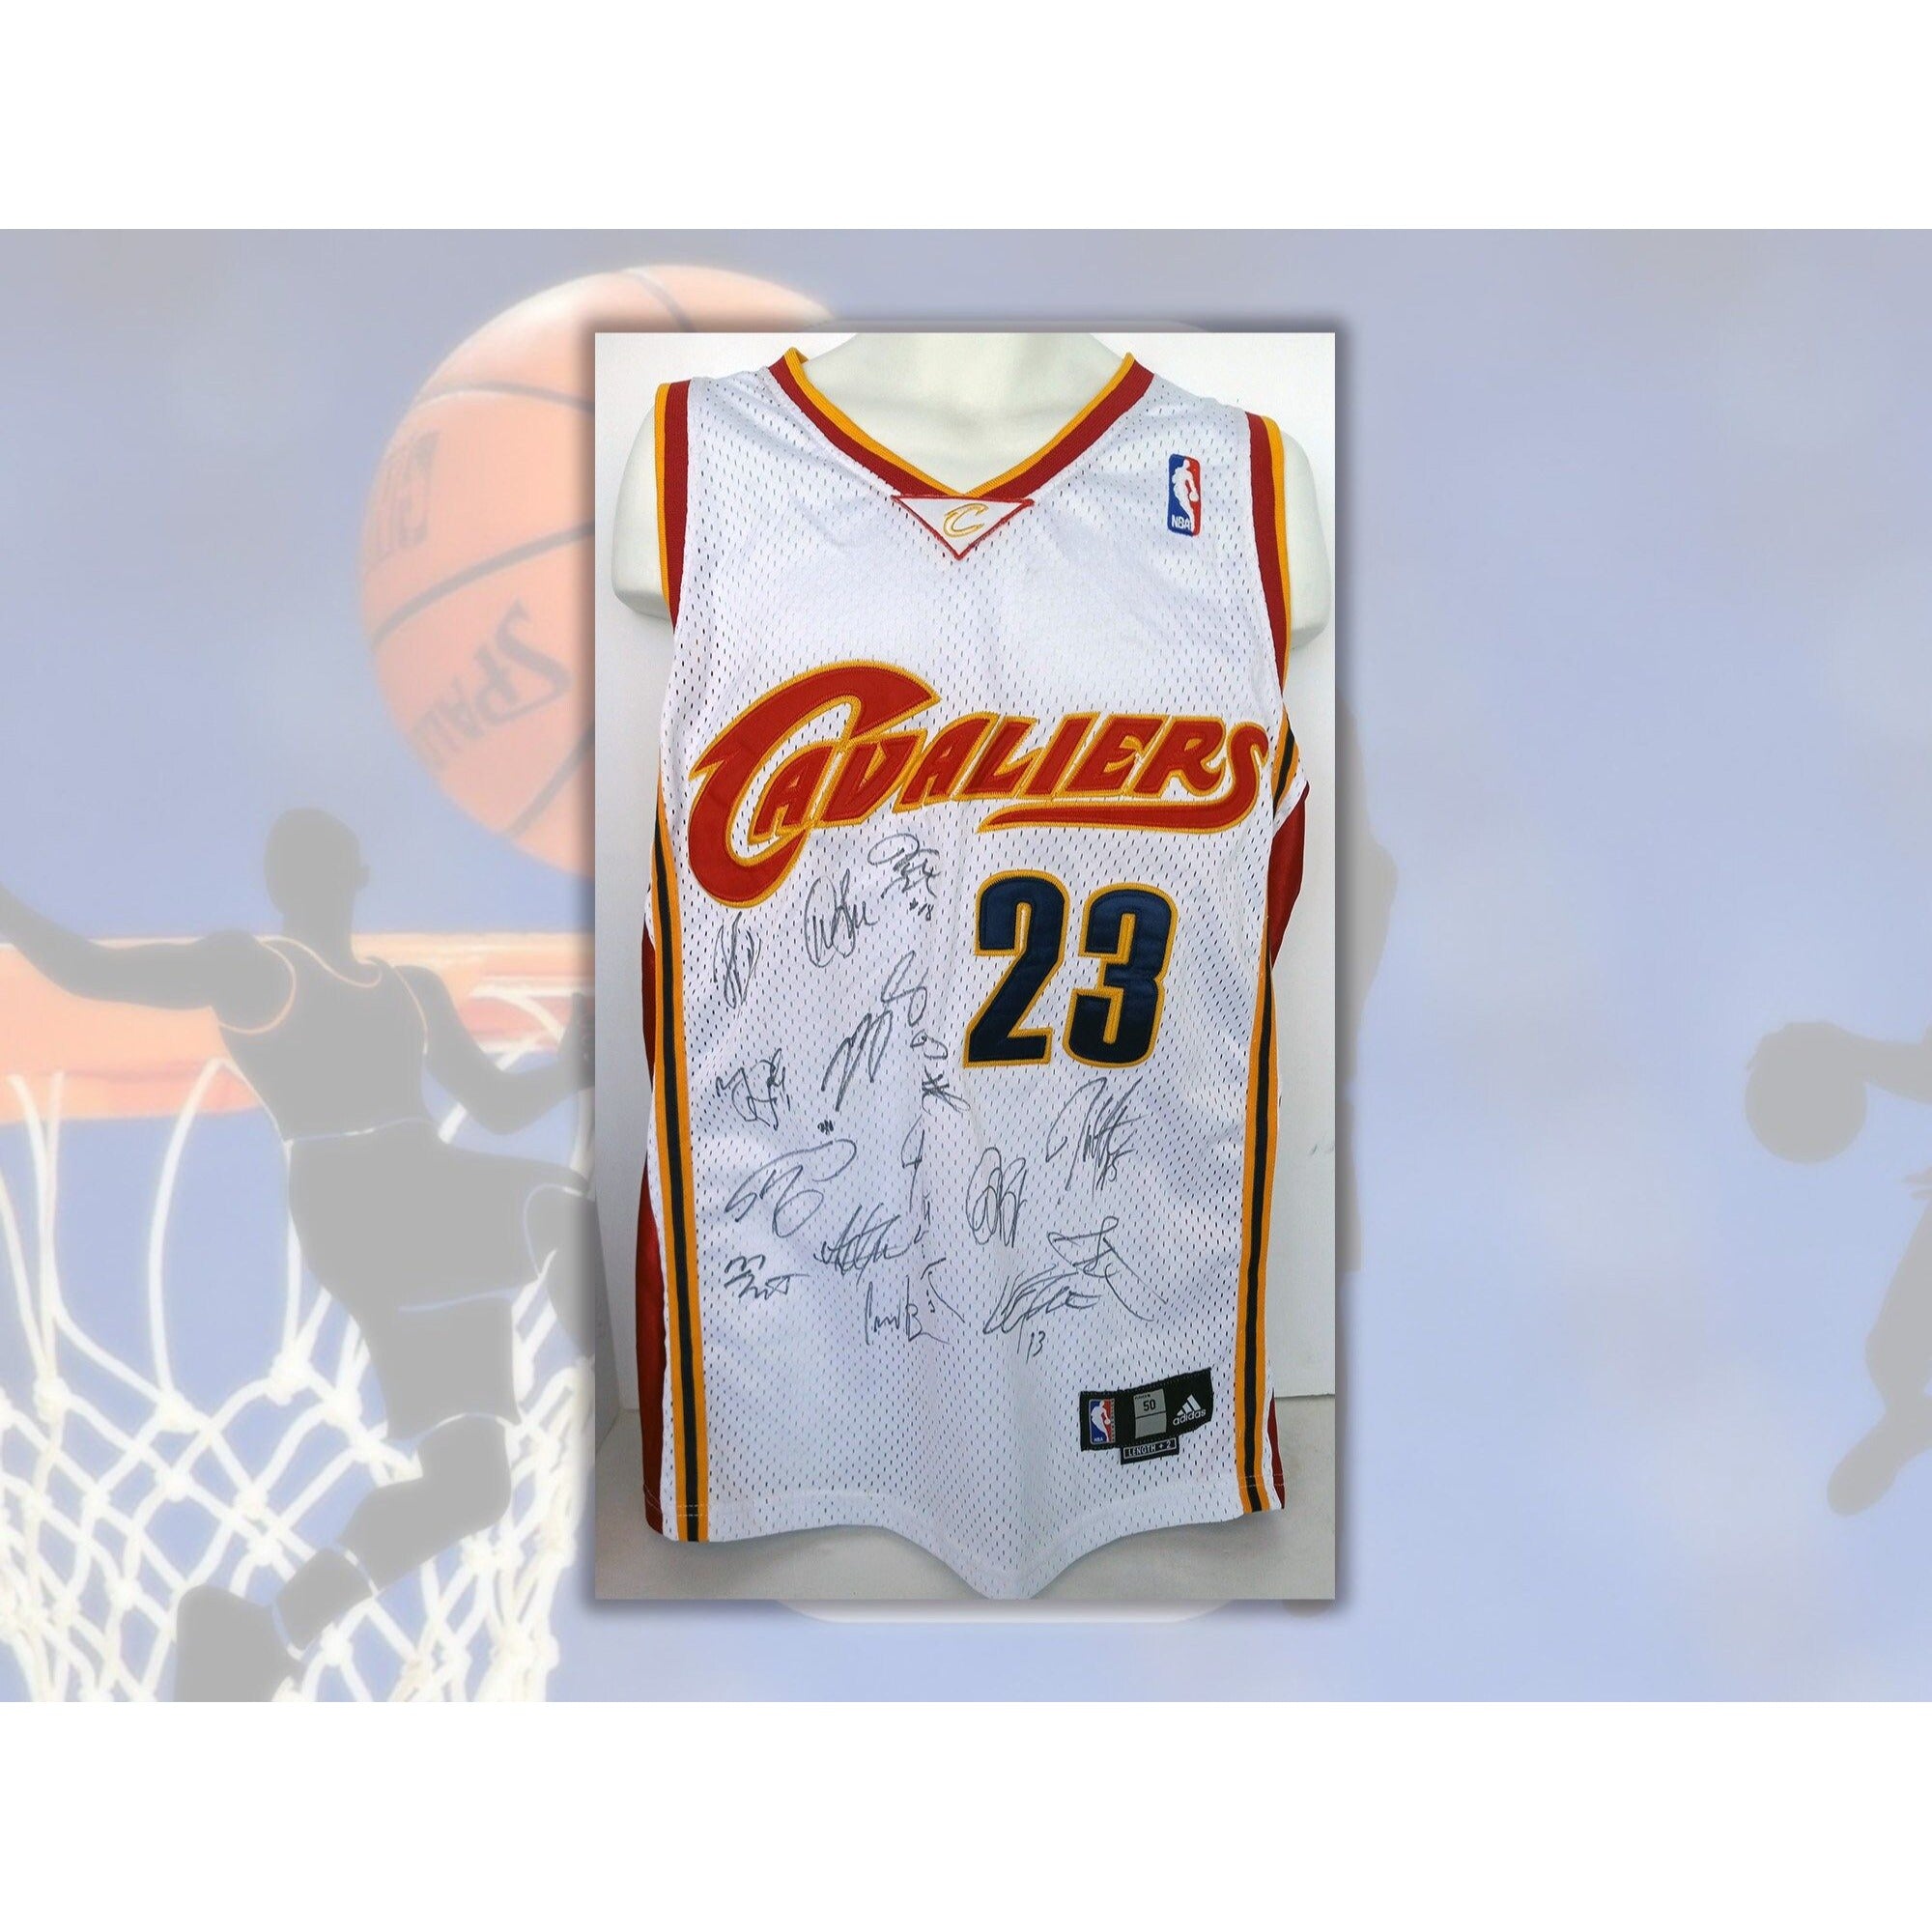 LeBron James, Shaquille O'Neal 2019 Cleveland Cavaliers team signed jersey signed with proof